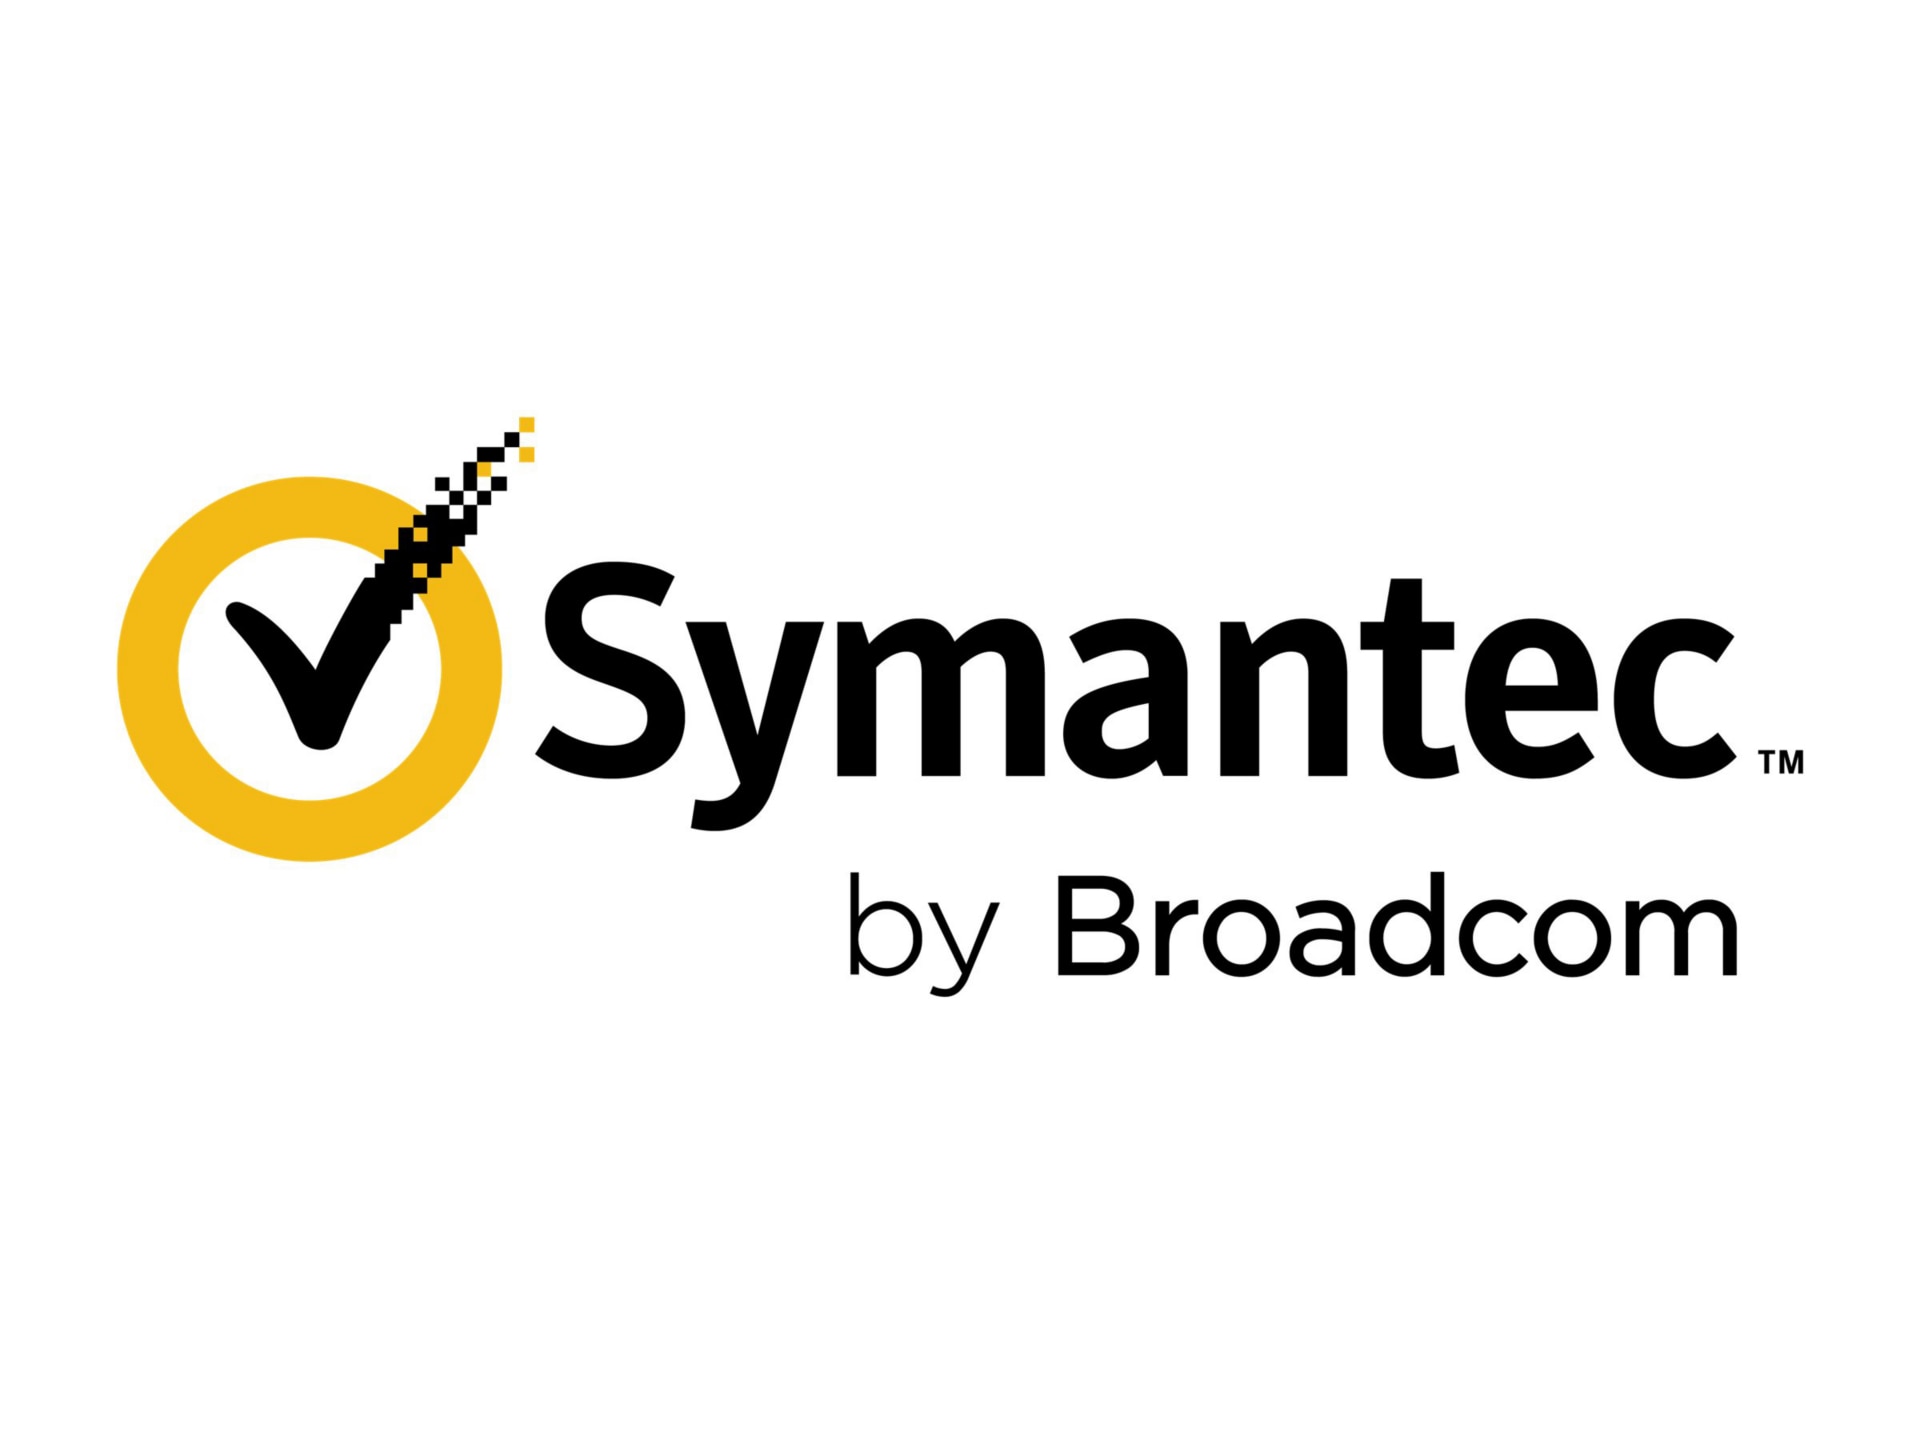 Symantec Data Loss Prevention Detection - Cloud Service Subscription + Support - 1 additional license